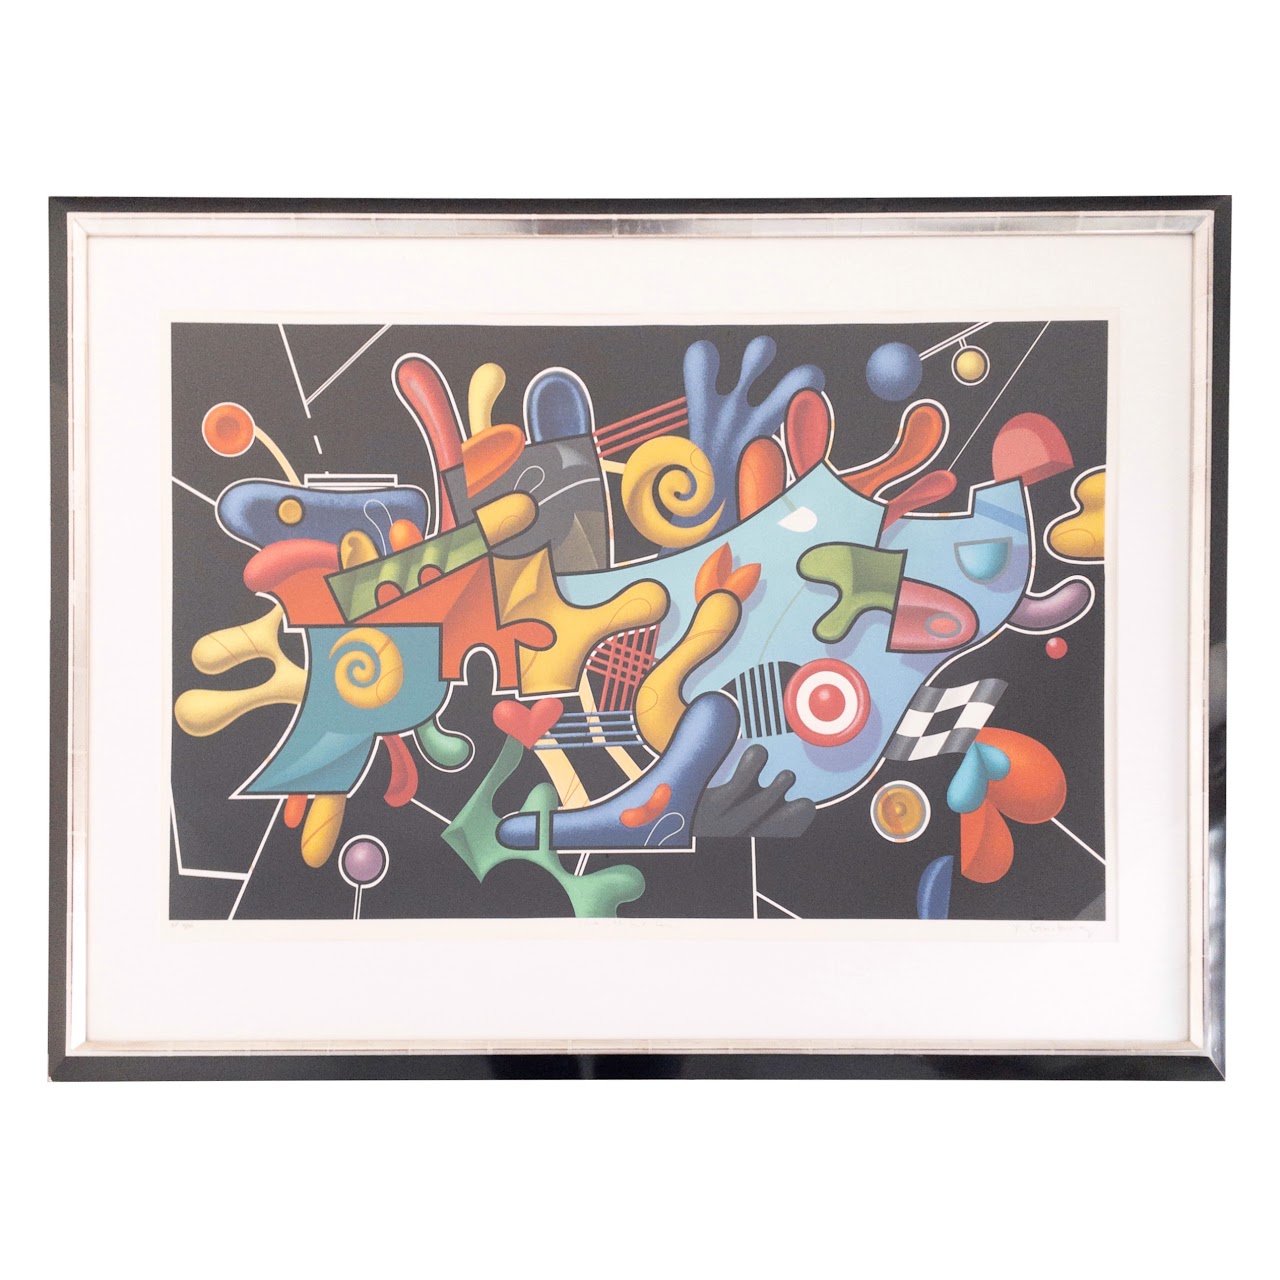 Yankel Ginsburg Signed 'Life in the Fast Lane' Lithograph